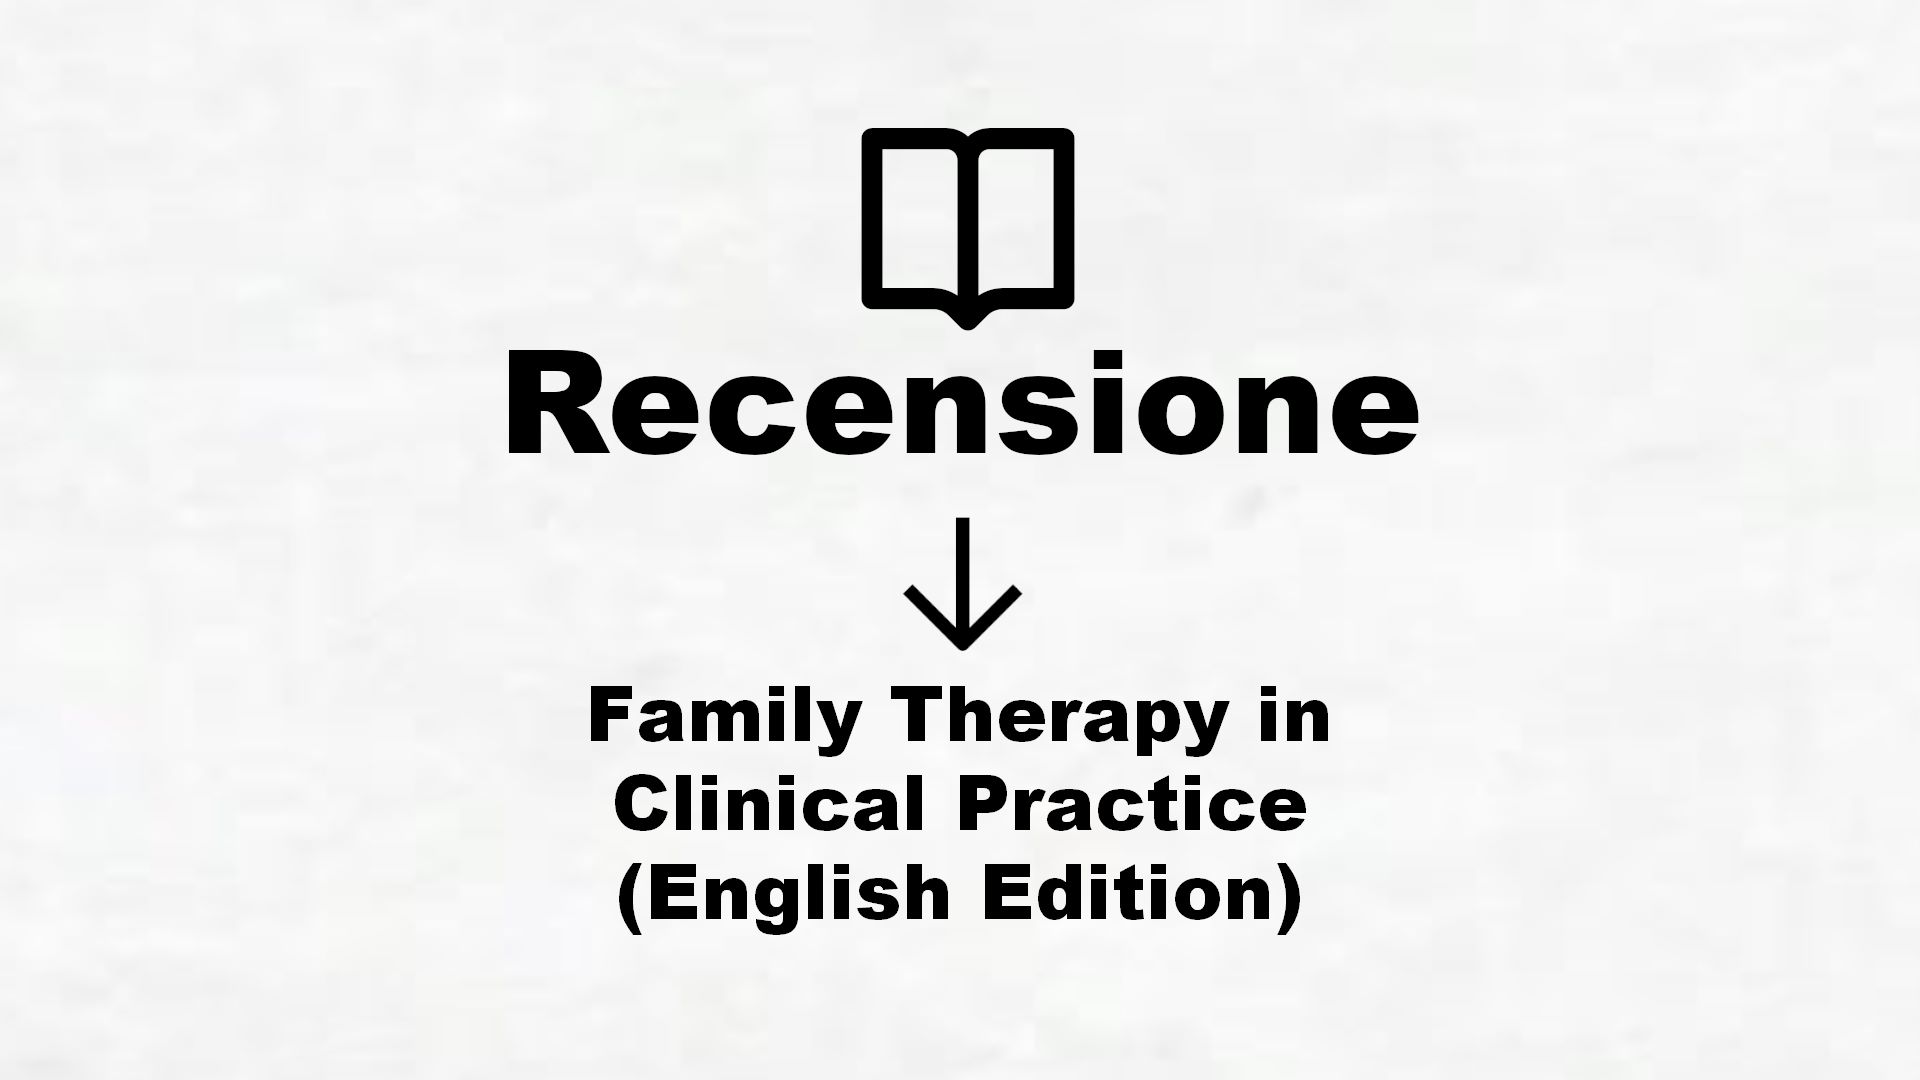 Family Therapy in Clinical Practice (English Edition) – Recensione Libro